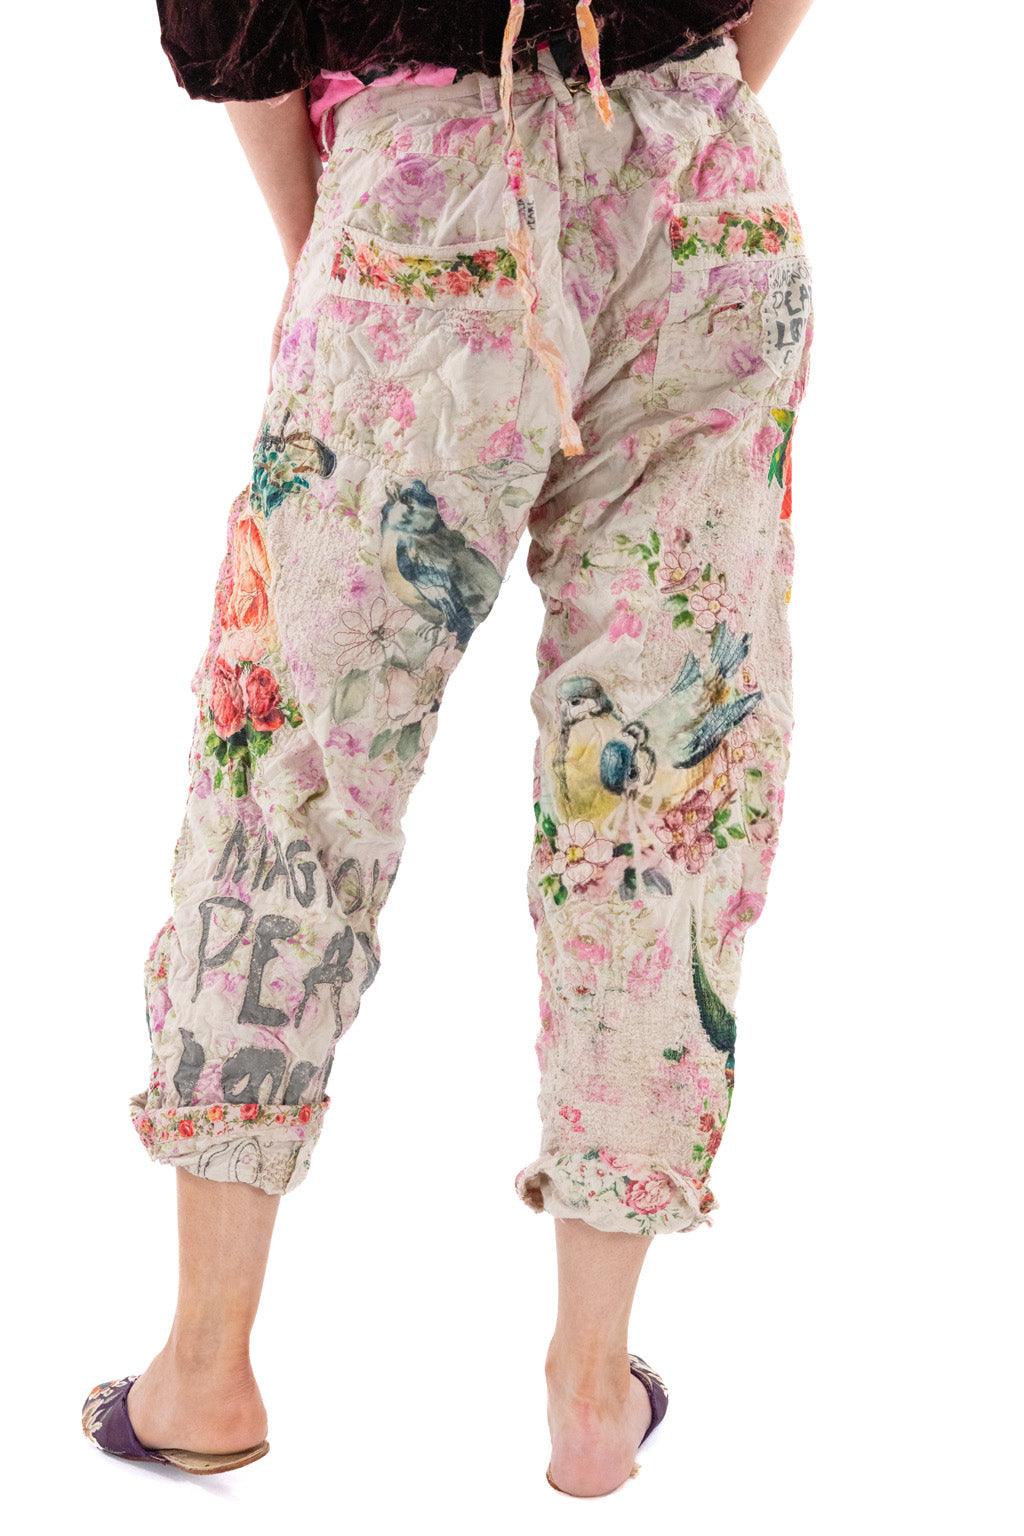 MP Love Co. Miners Pants - Magnolia Pearl Clothing